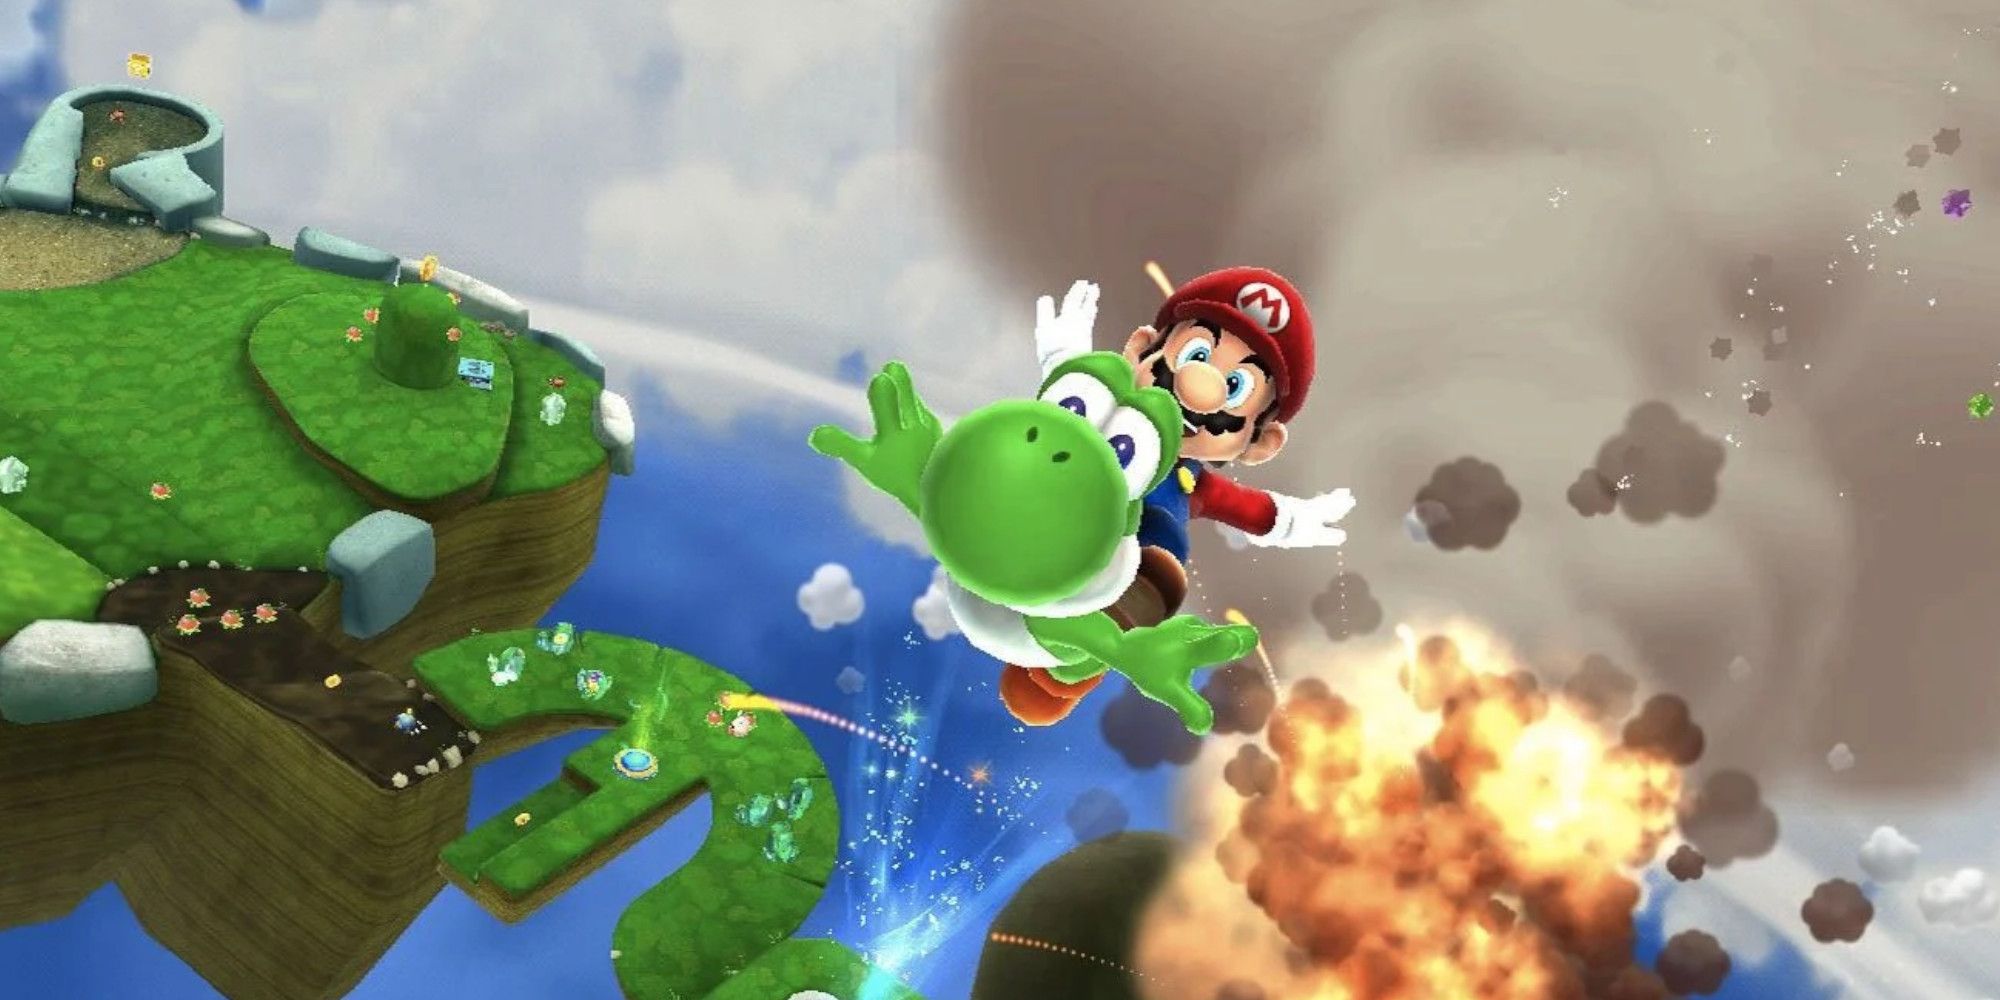 Mario and Yoshi in Super Mario Galaxy 2 for the Wii.